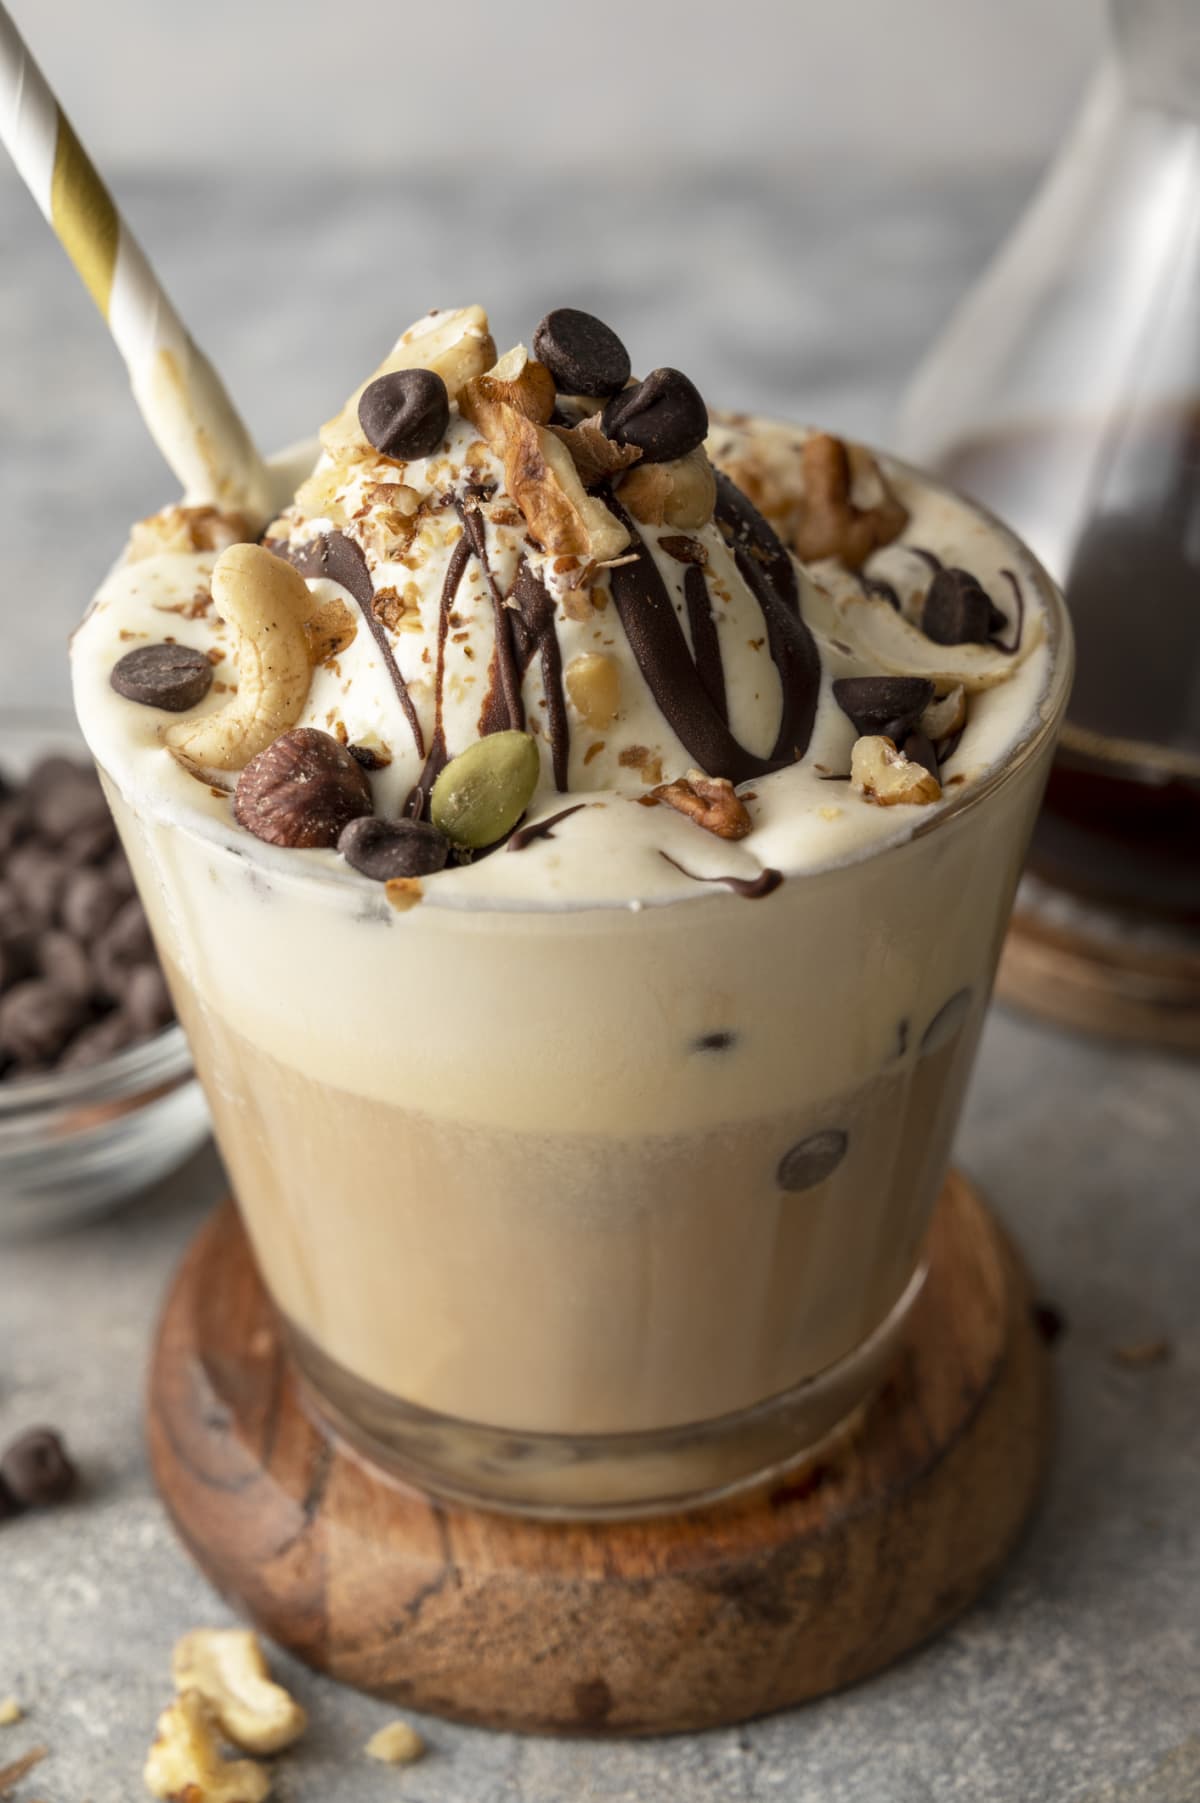 Coffee drink topped with ice cream, nuts, and chocolate chips